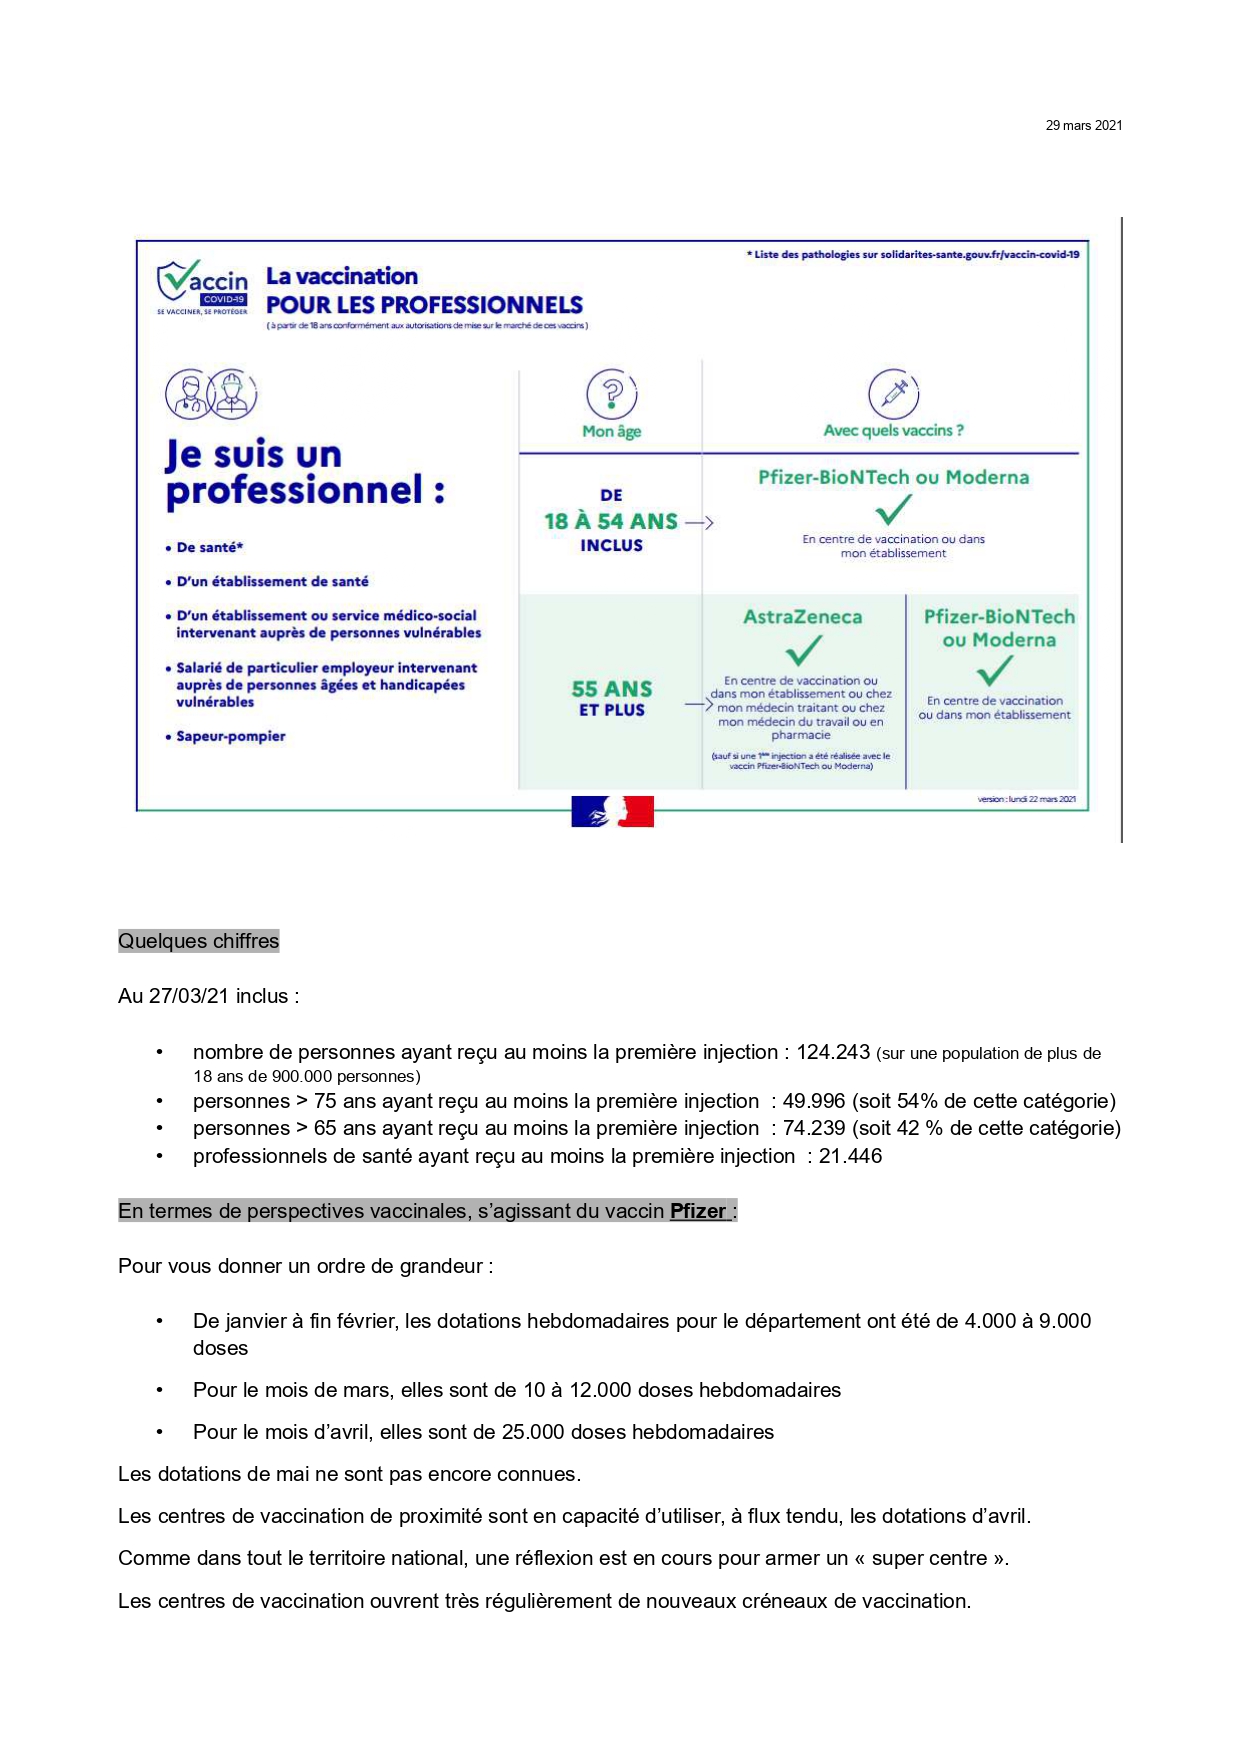 210329 vaccination - information n°5_page-0002